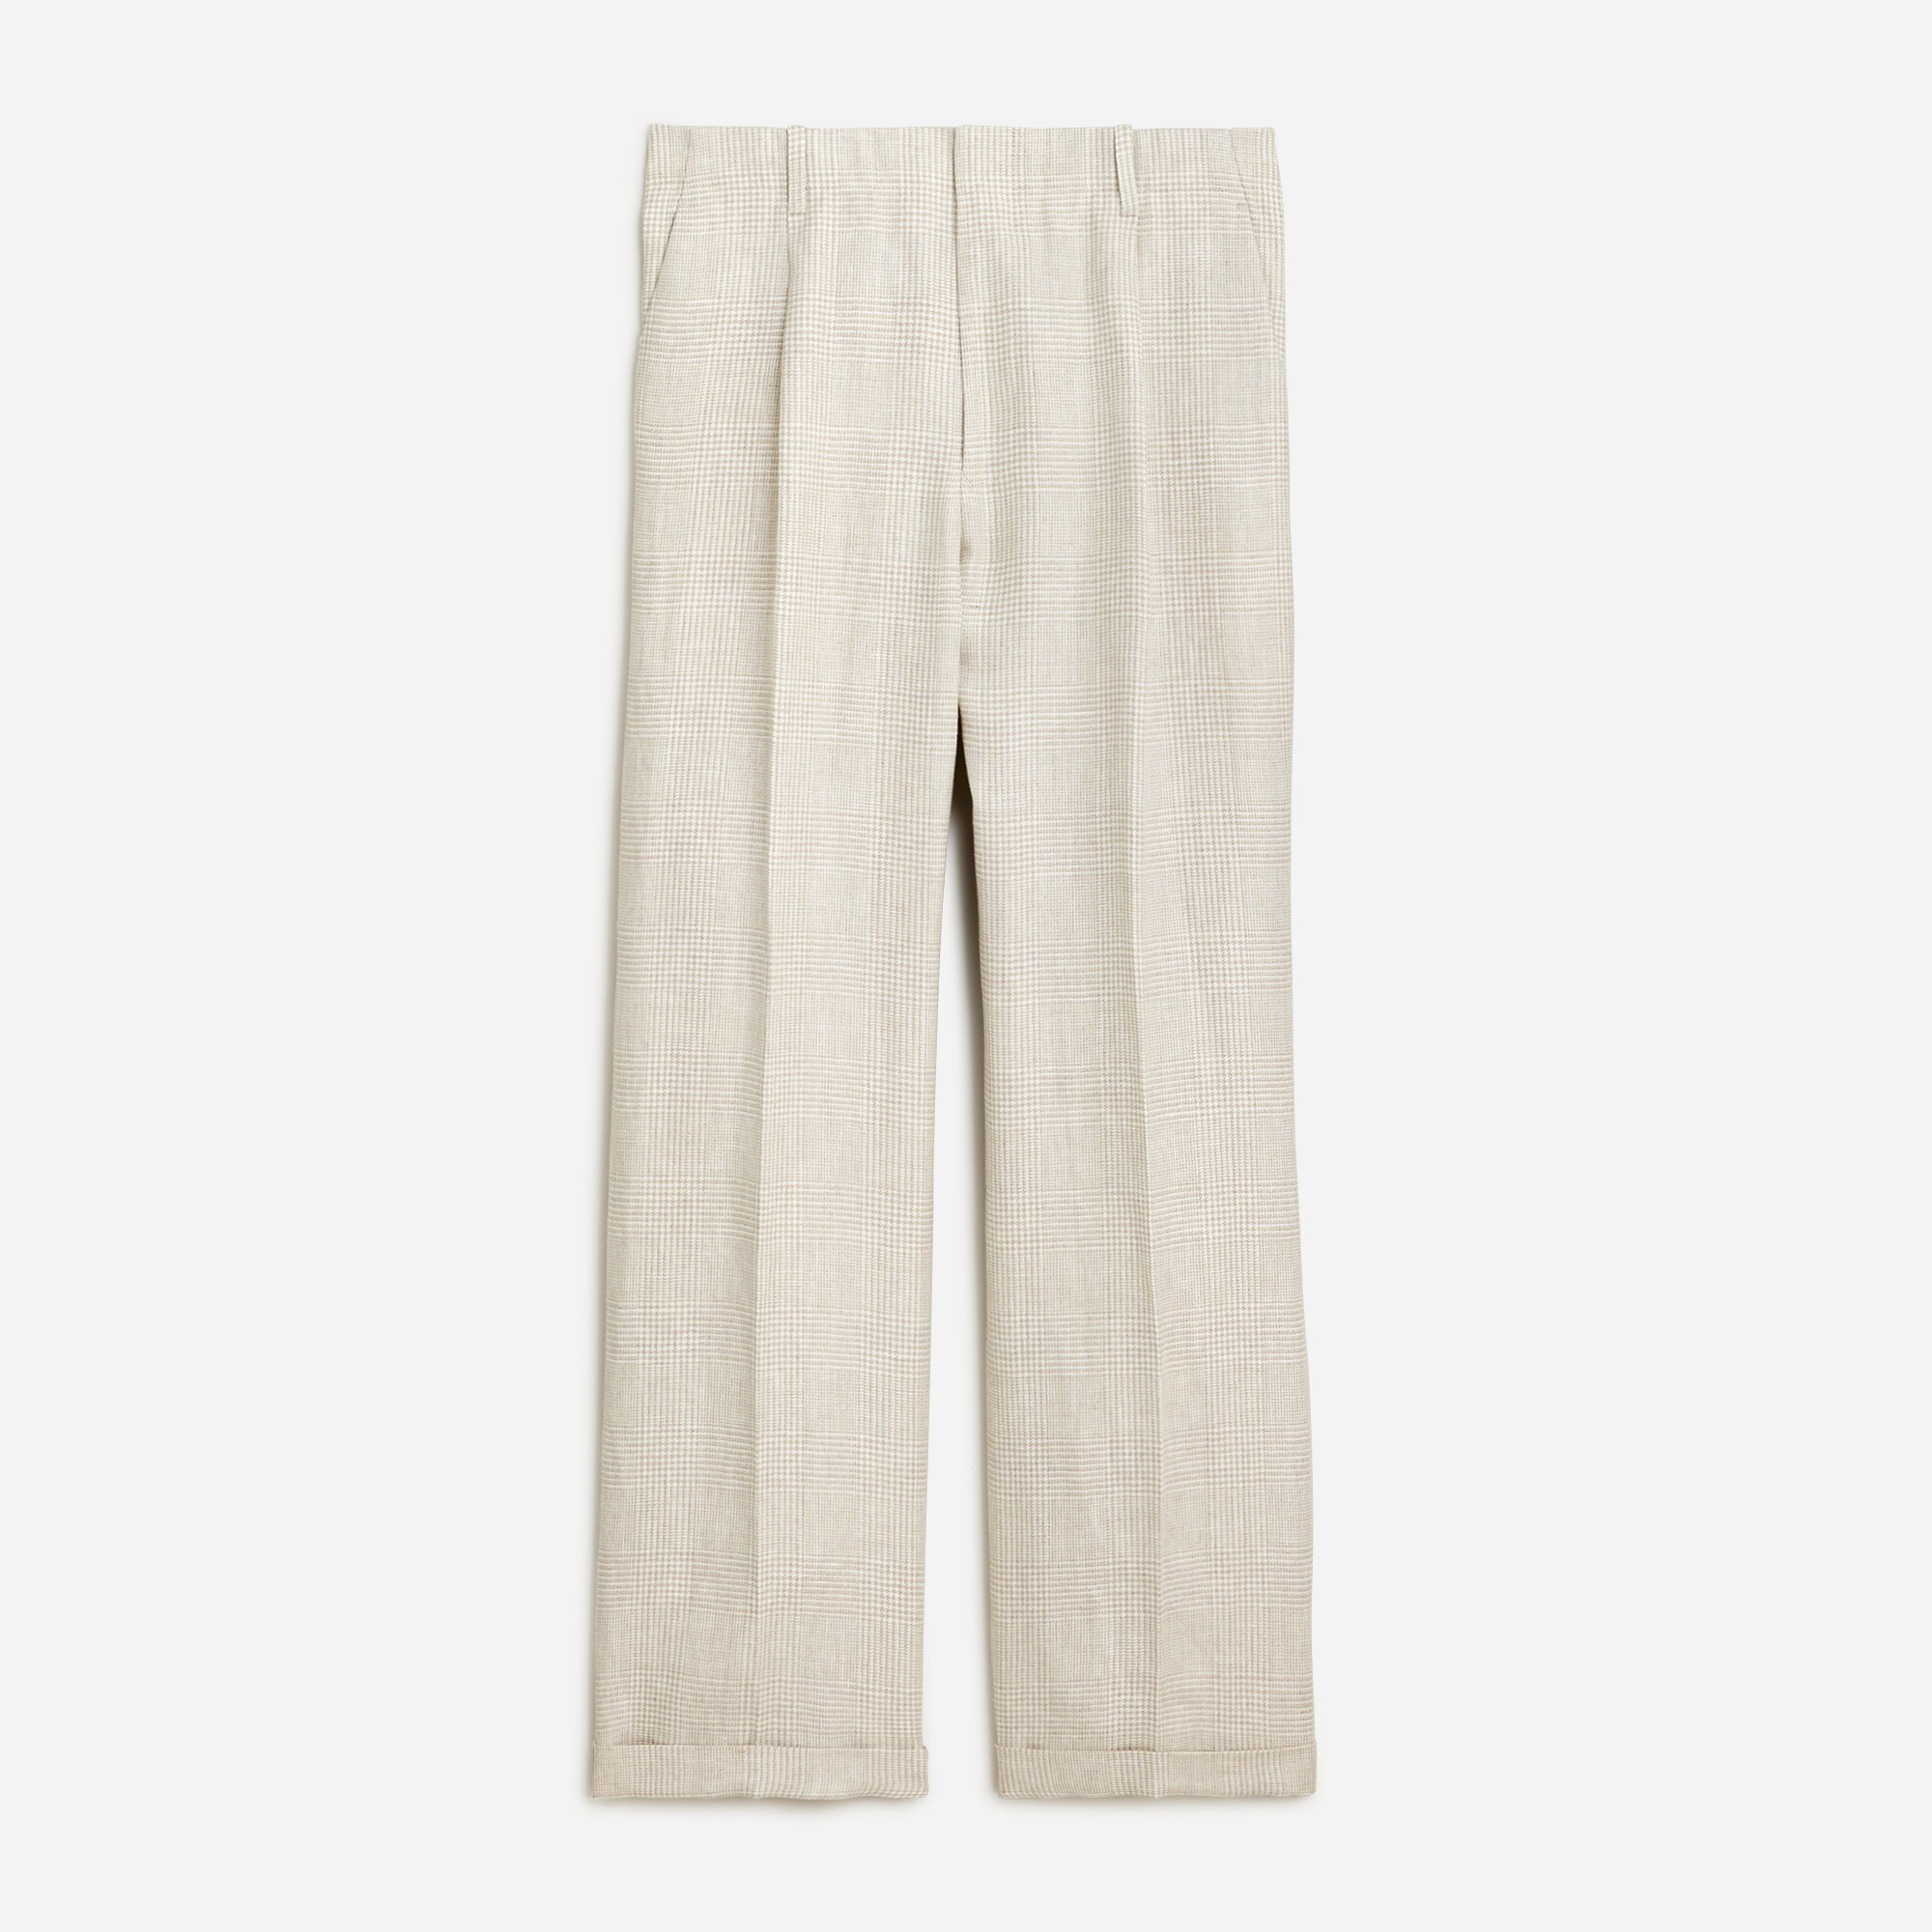 mens Big-fit pleated suit pant in linen twill glen plaid